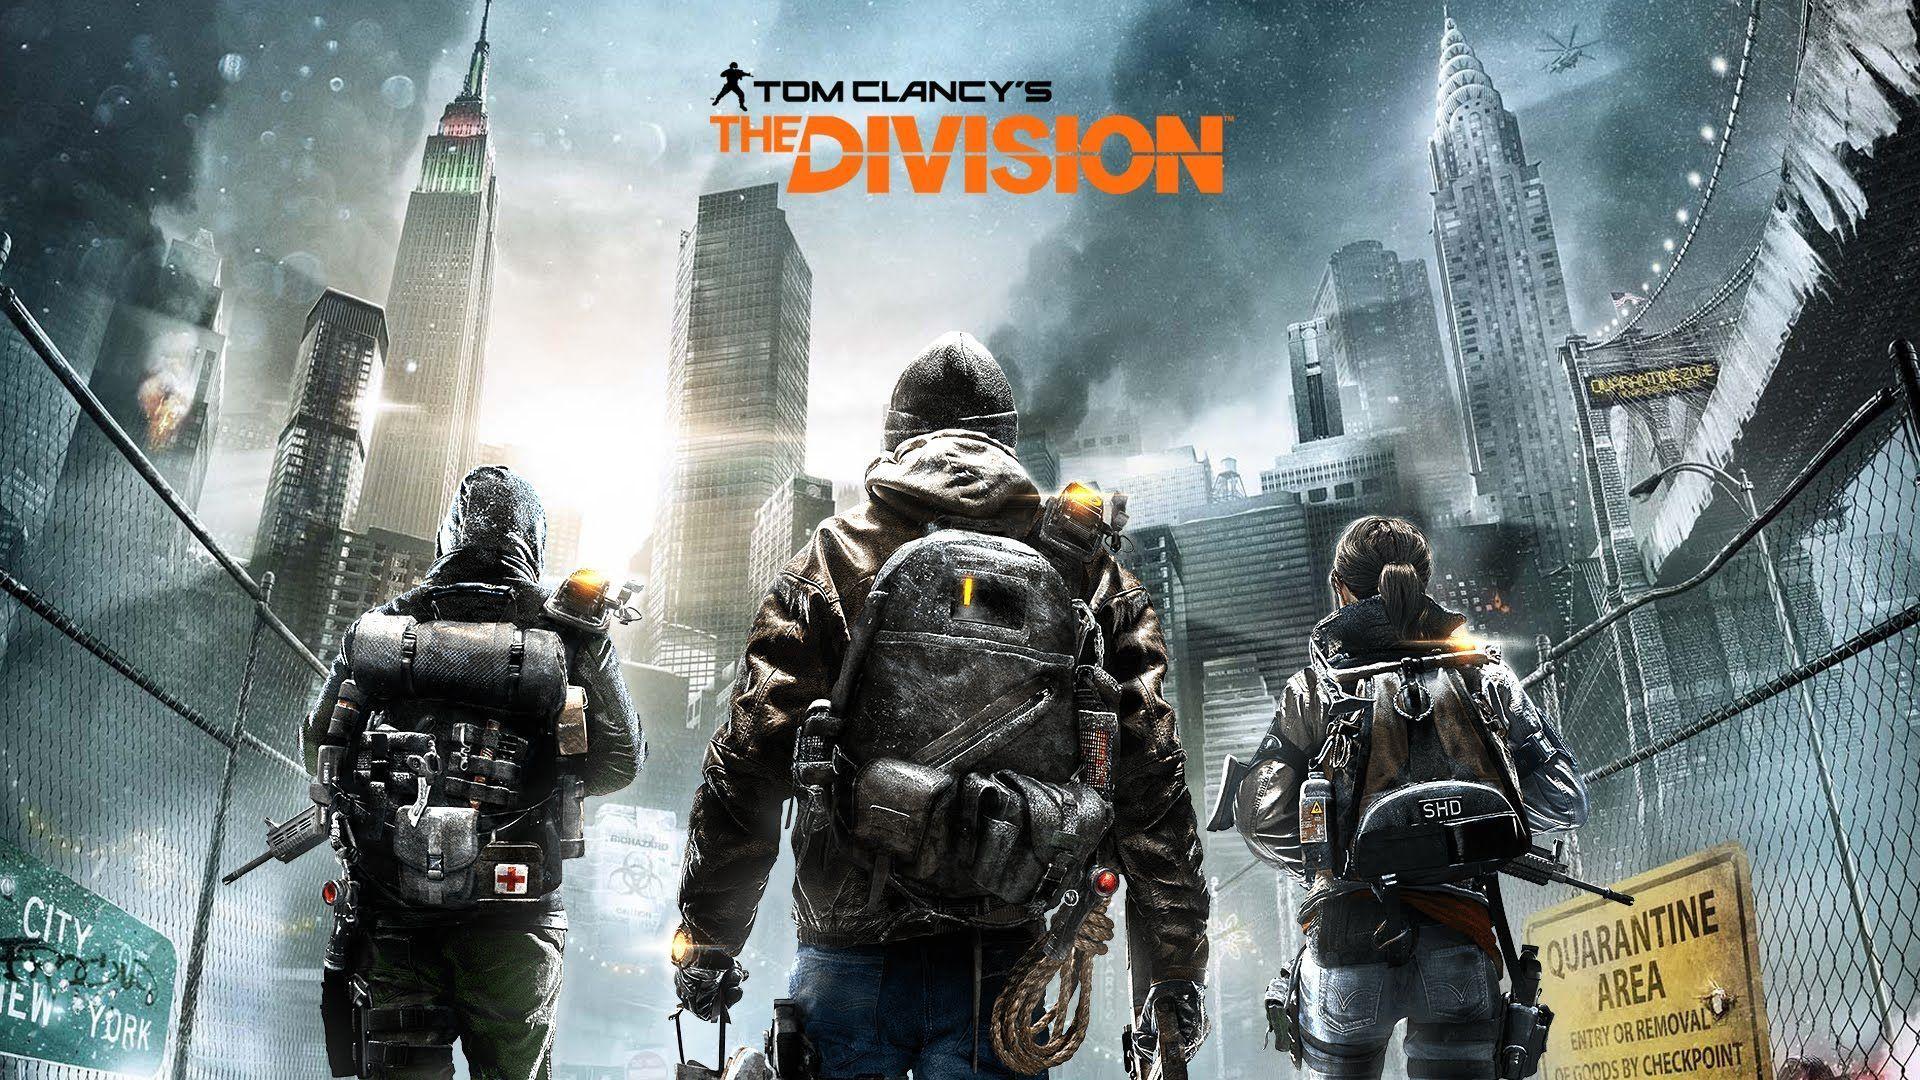 Tom Clancy's The Division HD Wallpaper. Tom Clancy's